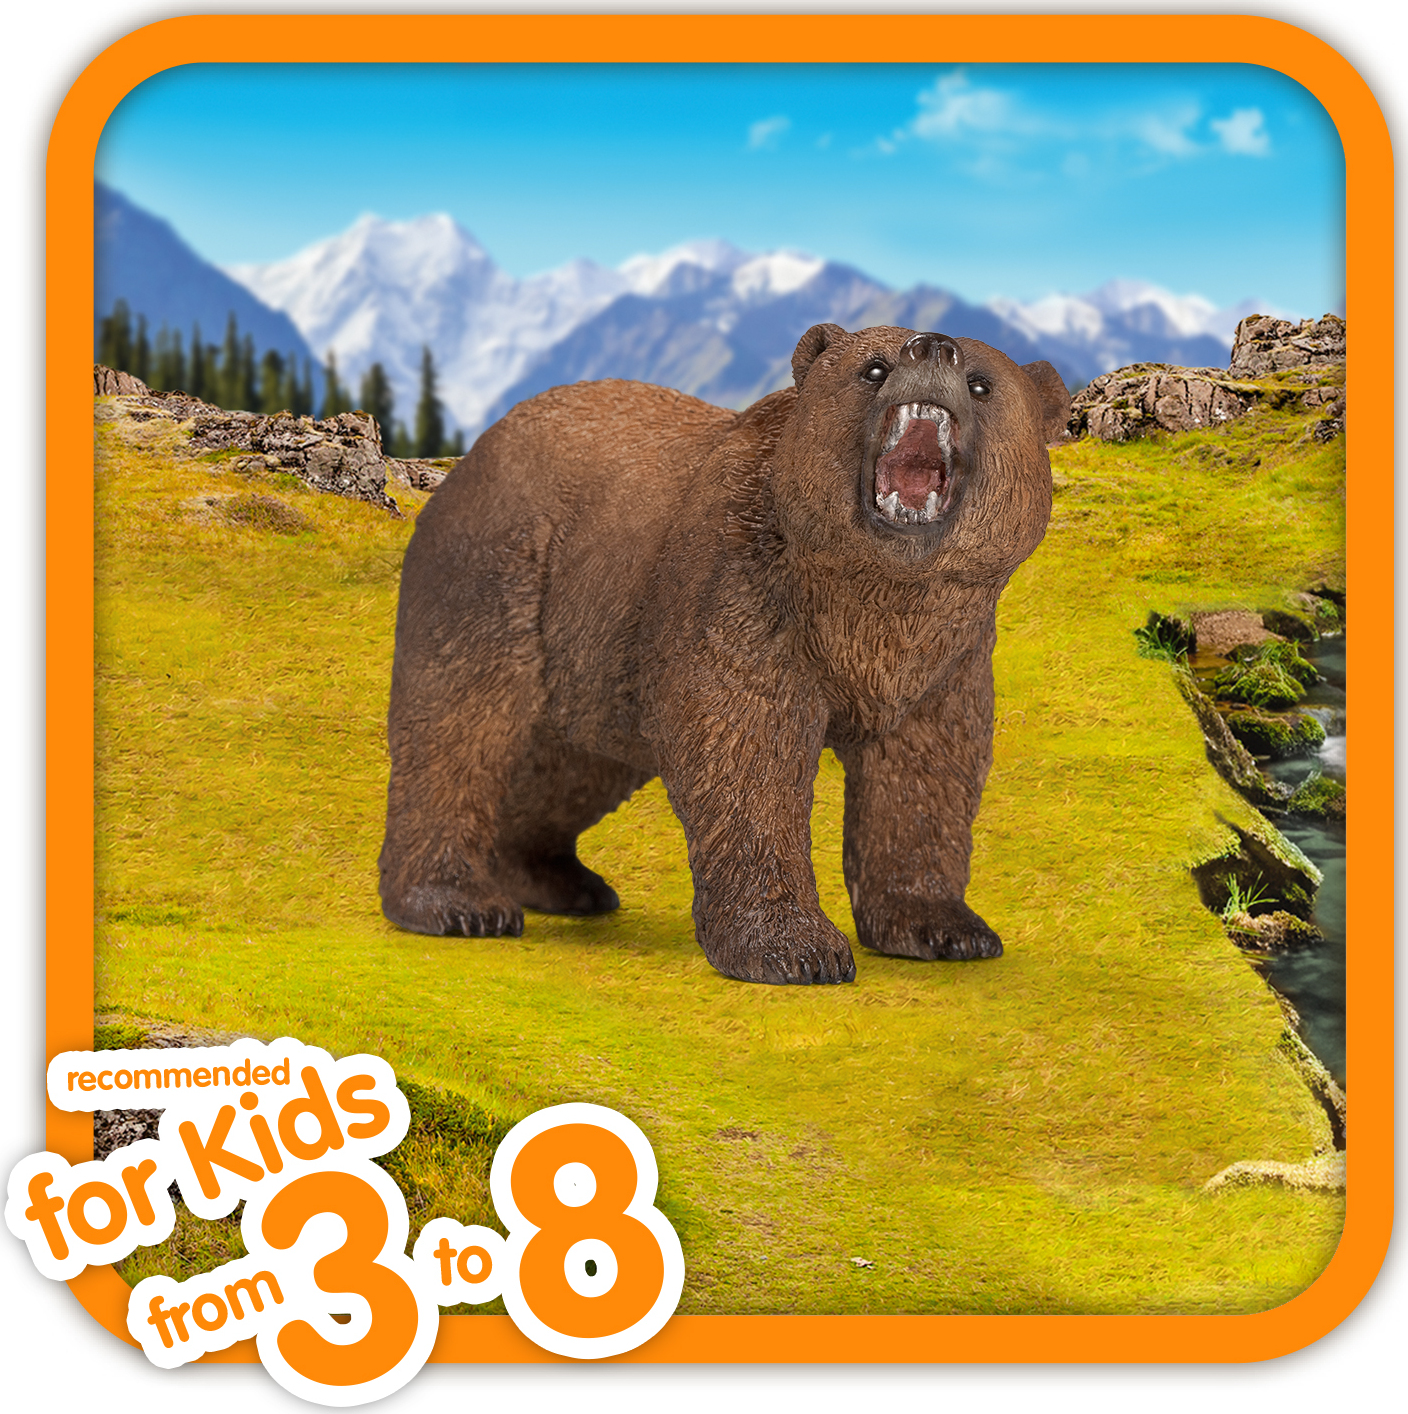 grizzly bear habitat for kids